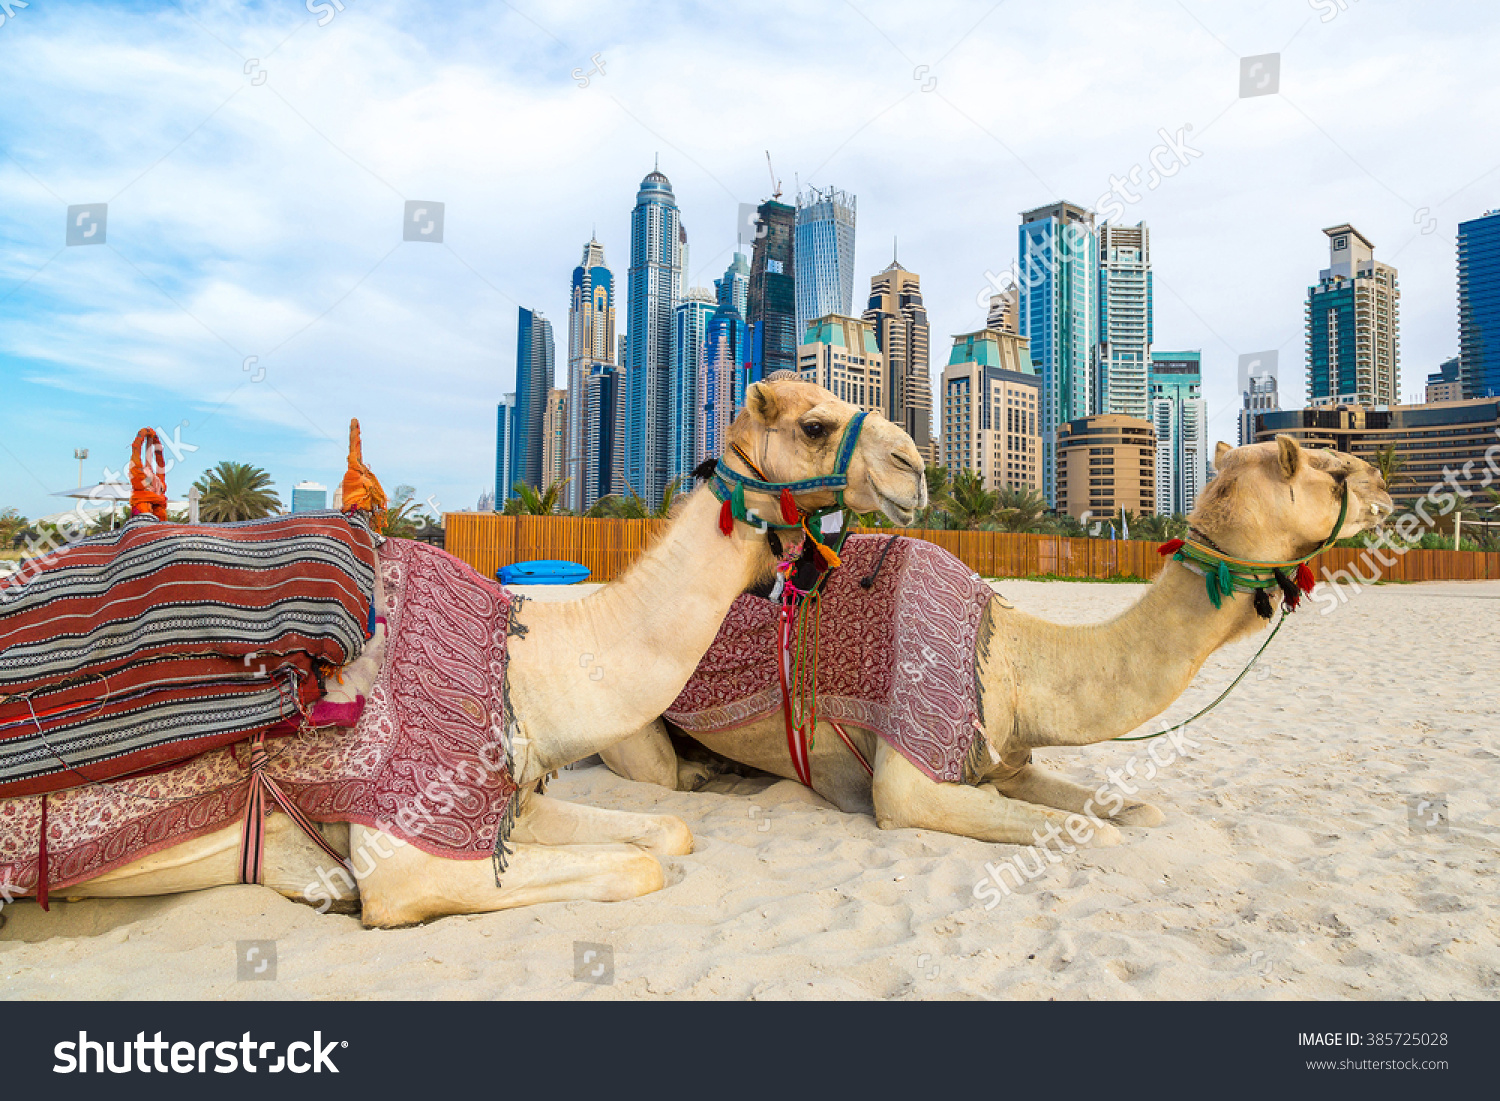 Camel in front of Dubai Marina in a summer day, United Arab Emirates #385725028